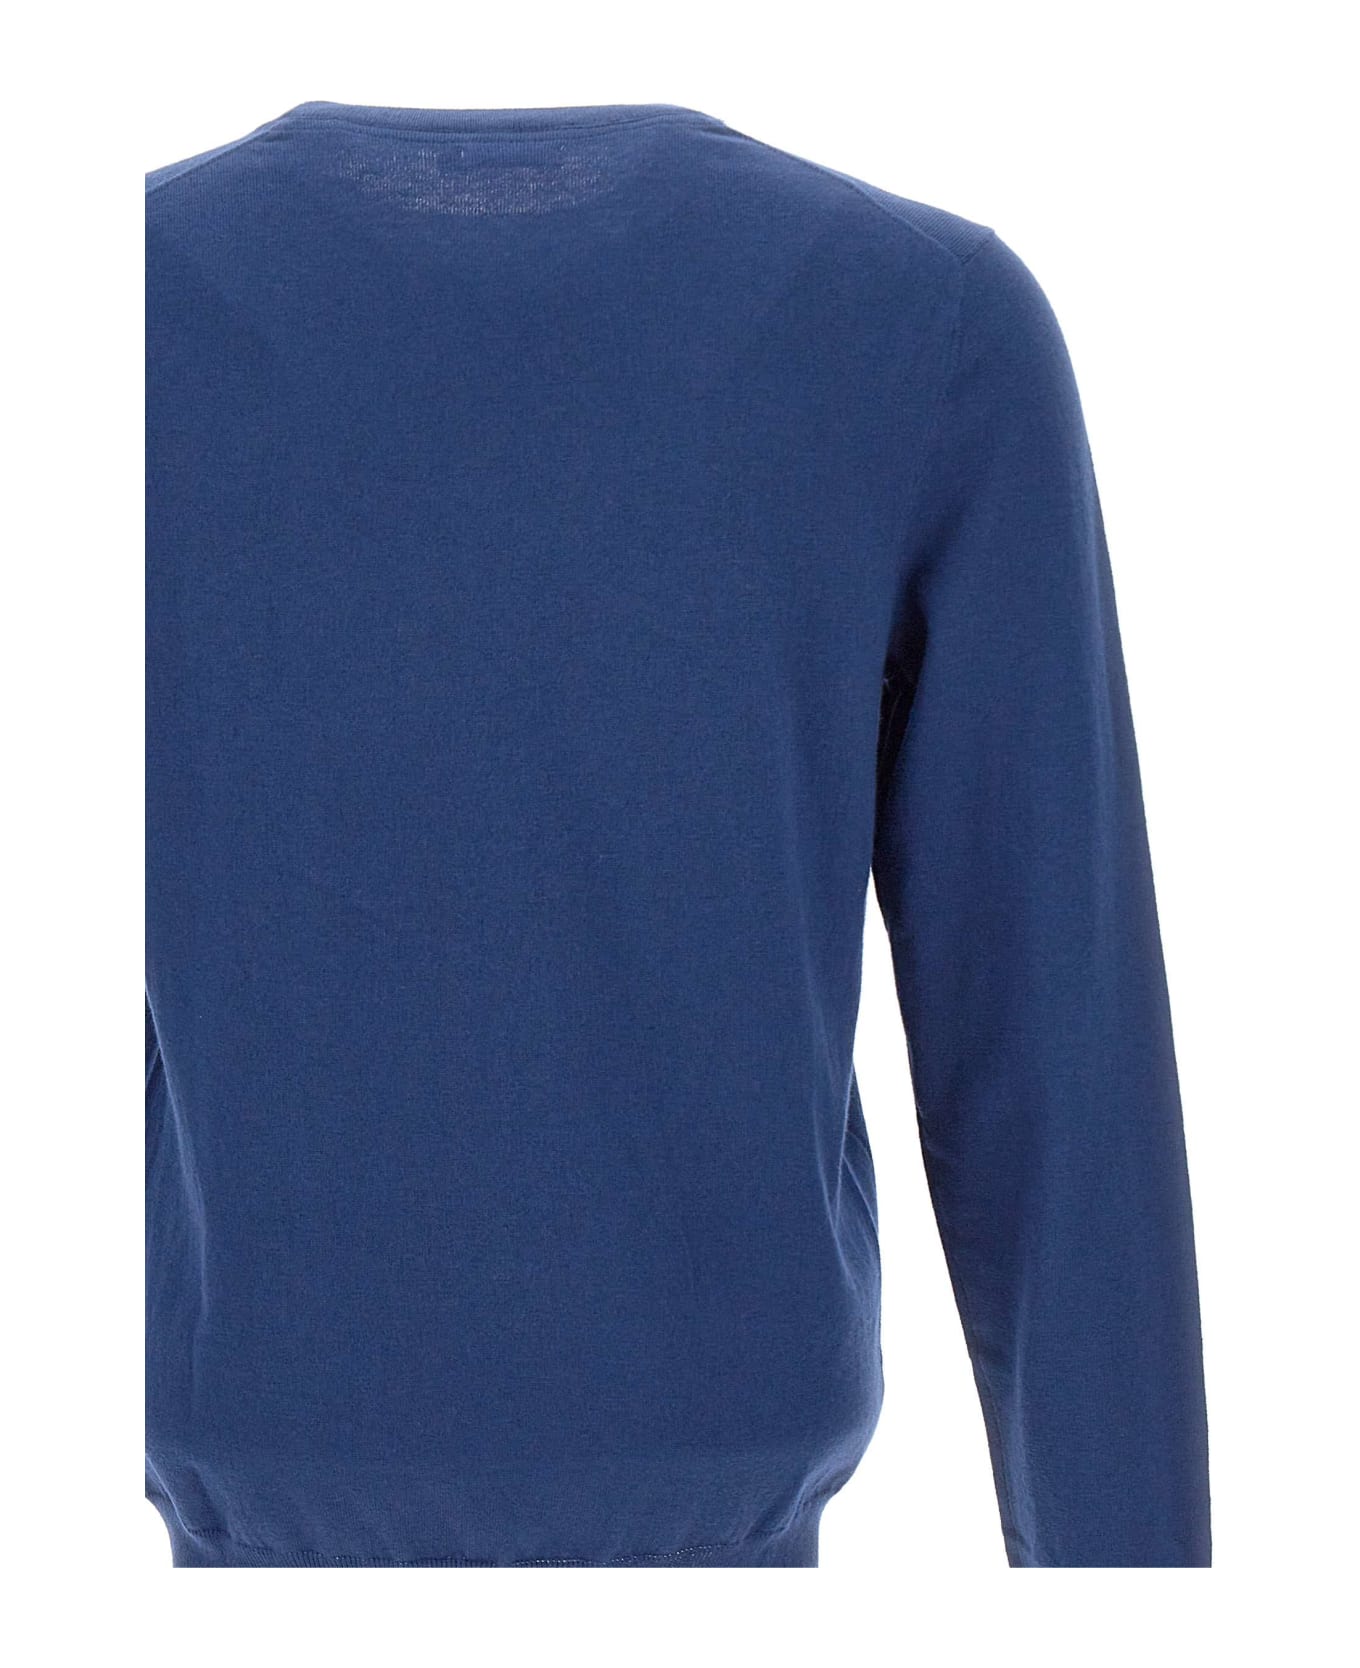 Sun 68 'round Double' Cotton And Wool Pullover Sweater - BLUE